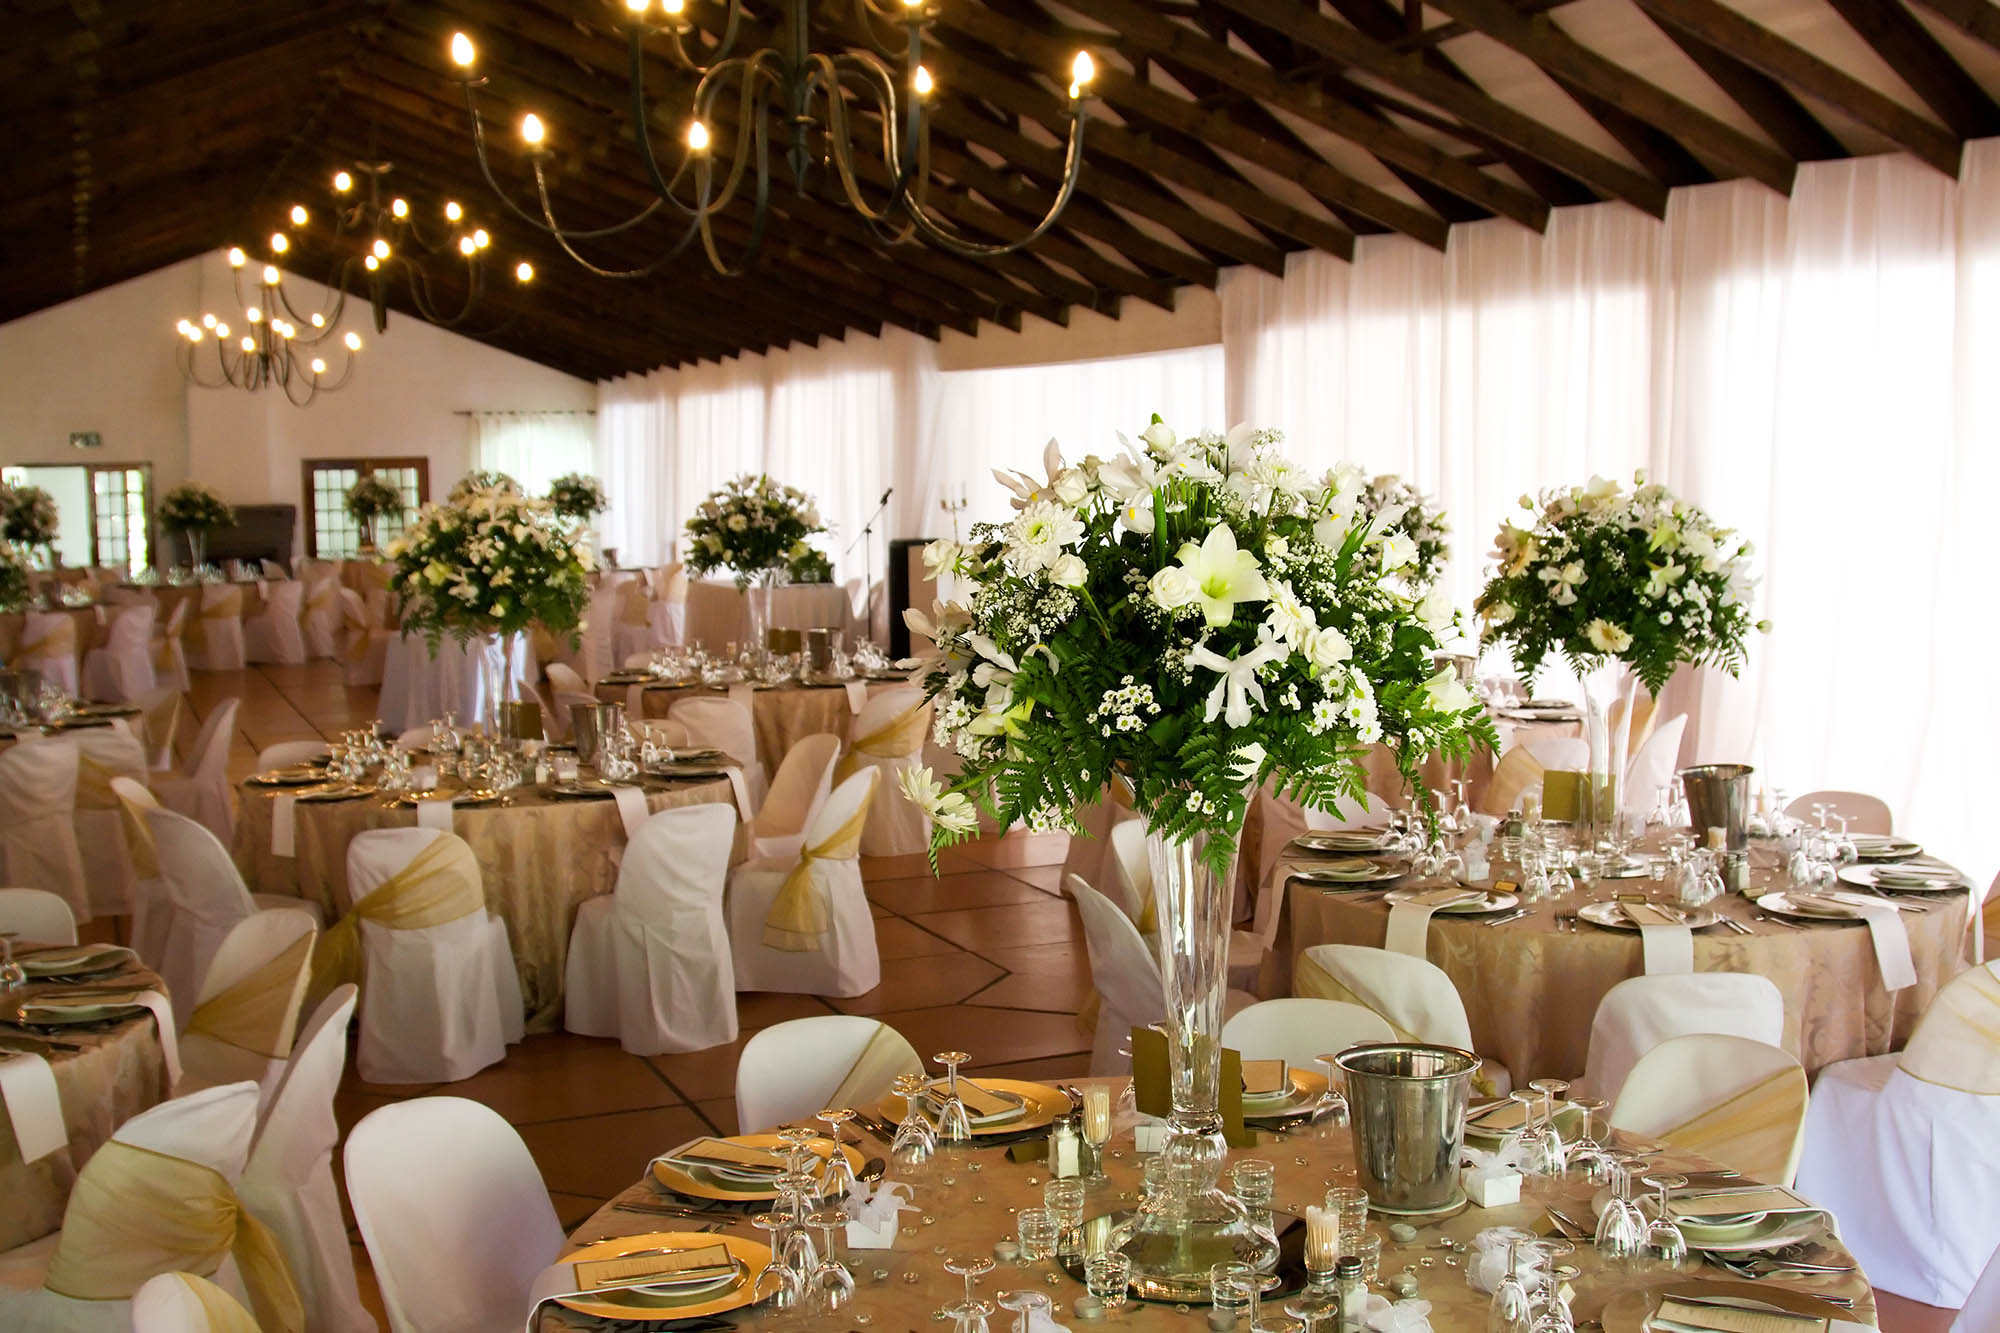 Indoors wedding reception venue with dÃ©cor, selective focus on flowers